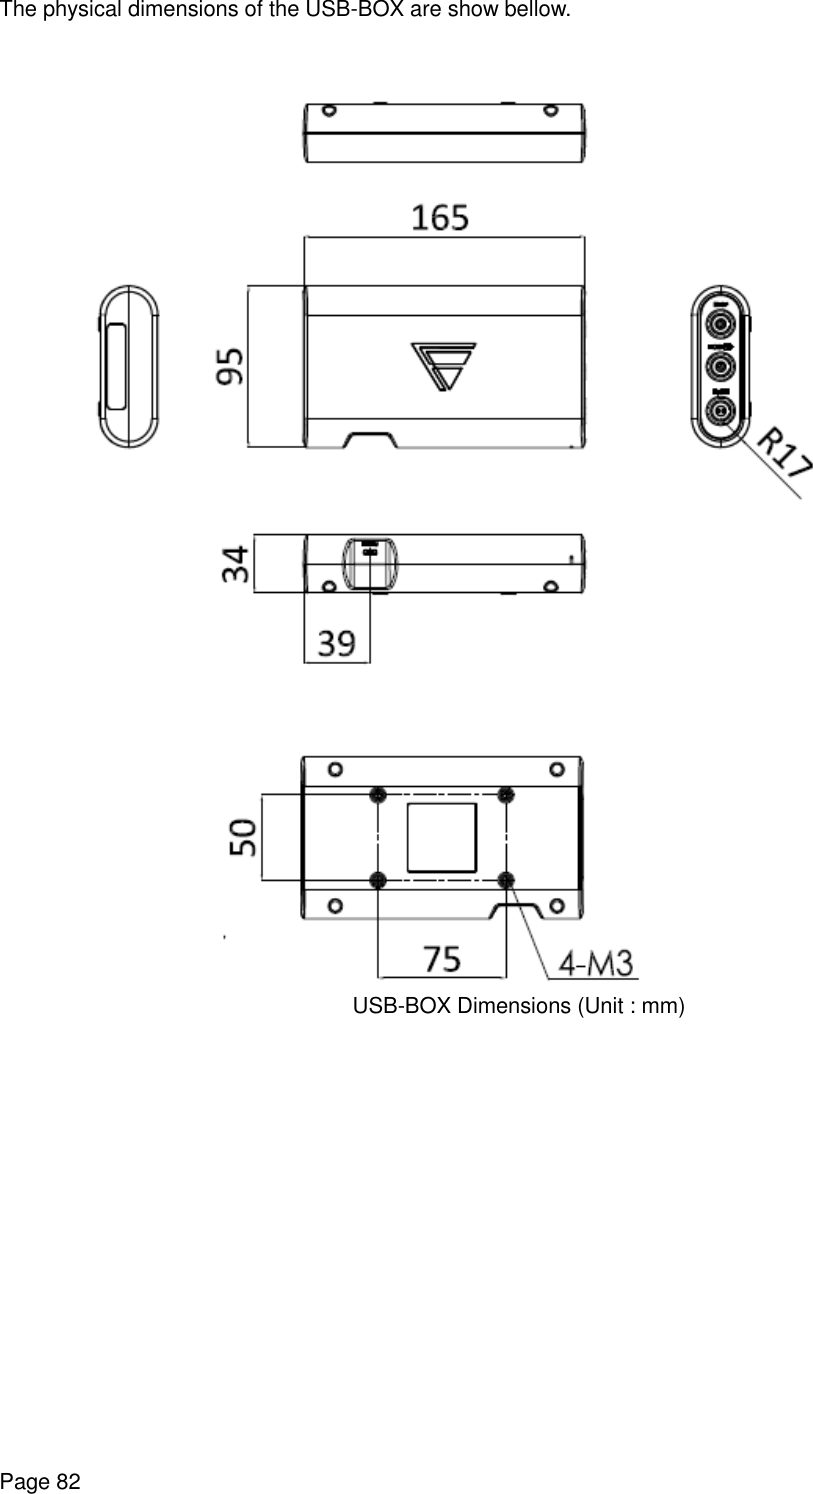    Page 82 The physical dimensions of the USB-BOX are show bellow.    USB-BOX Dimensions (Unit : mm)  